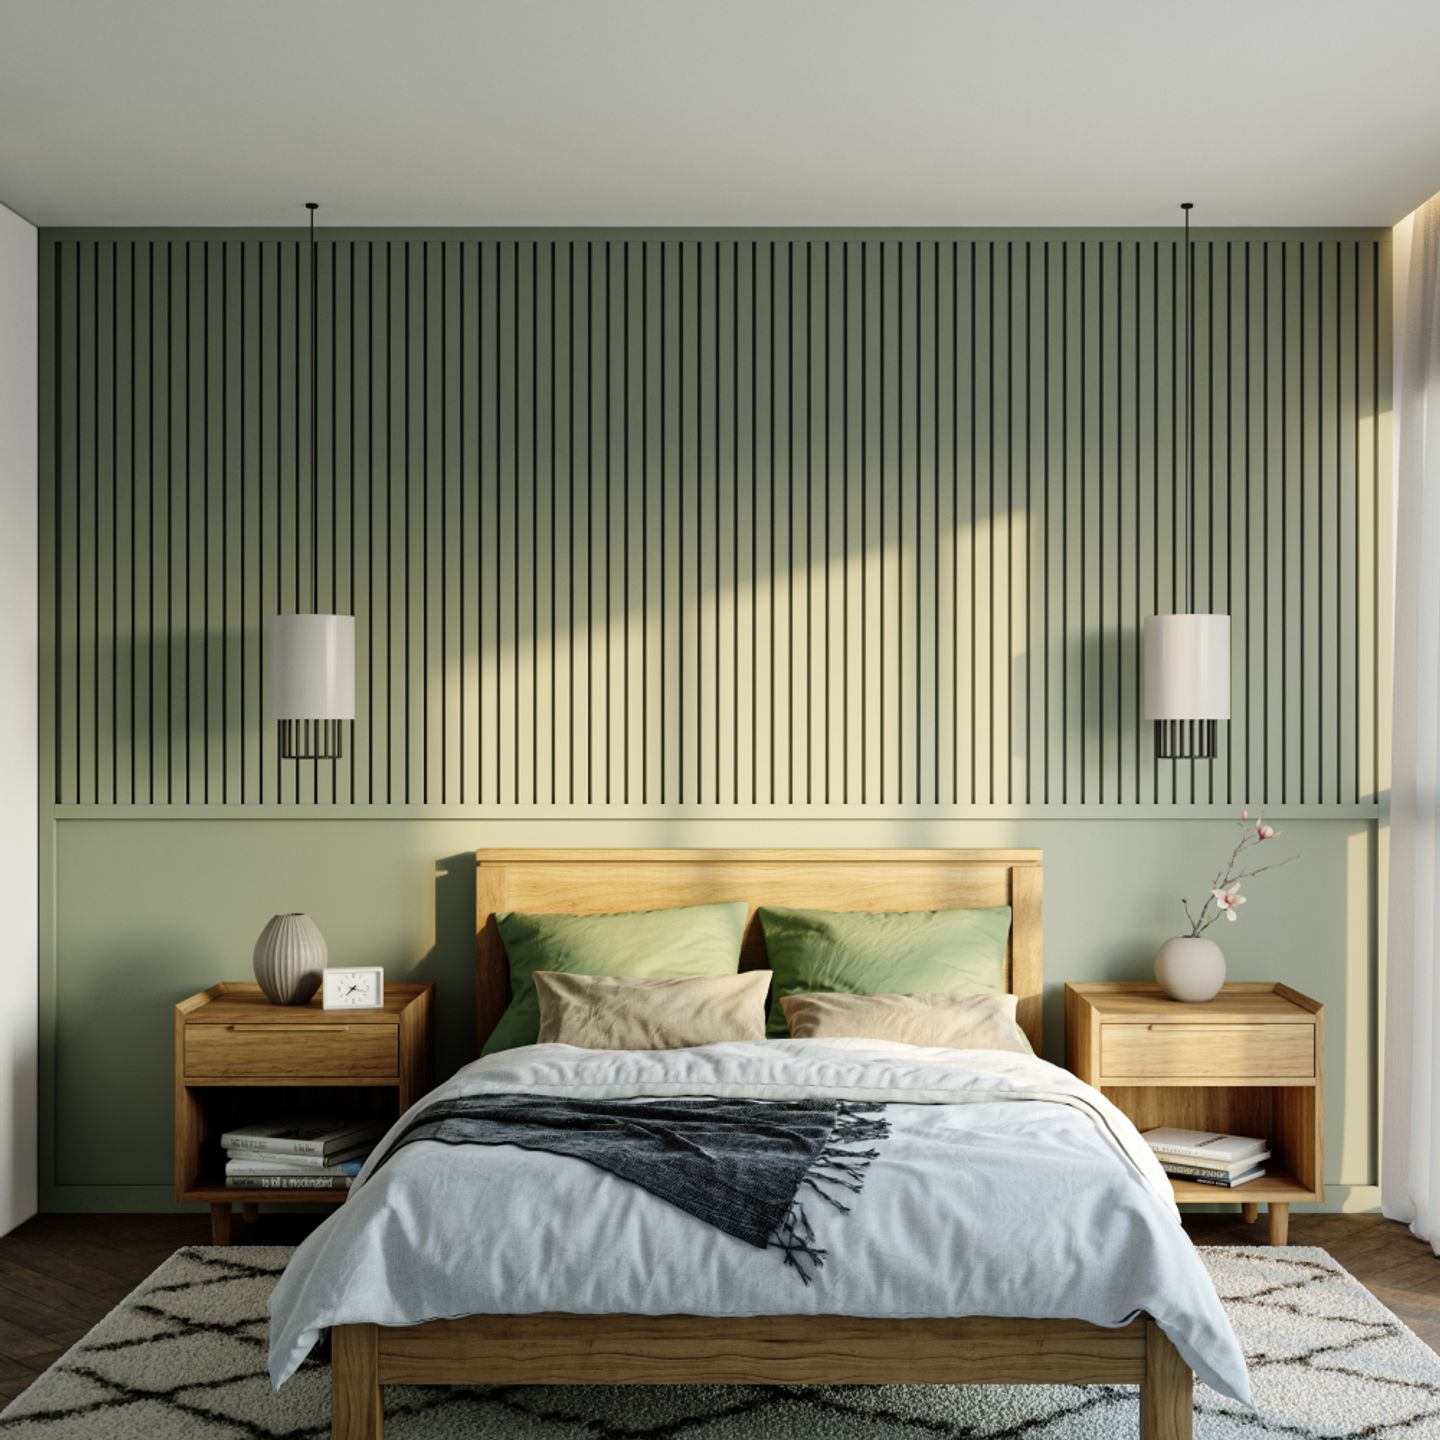 Pastel Green Wall Design With Panelling - Livspace